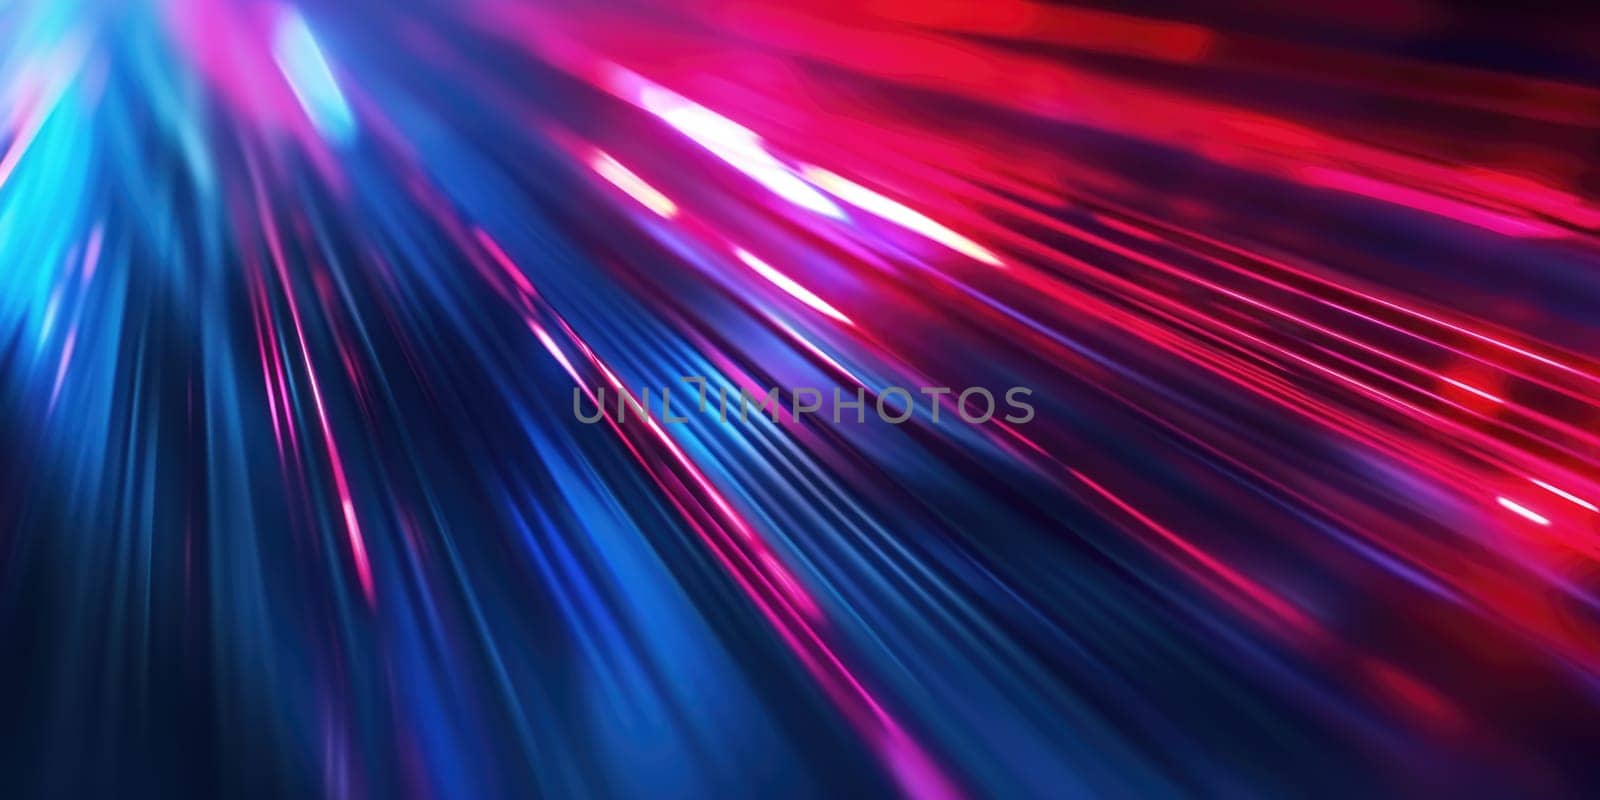 Abstract background with dynamic streaks of blue and red light, conveying a sense of speed and movement in a vibrant color palette. Resplendent.